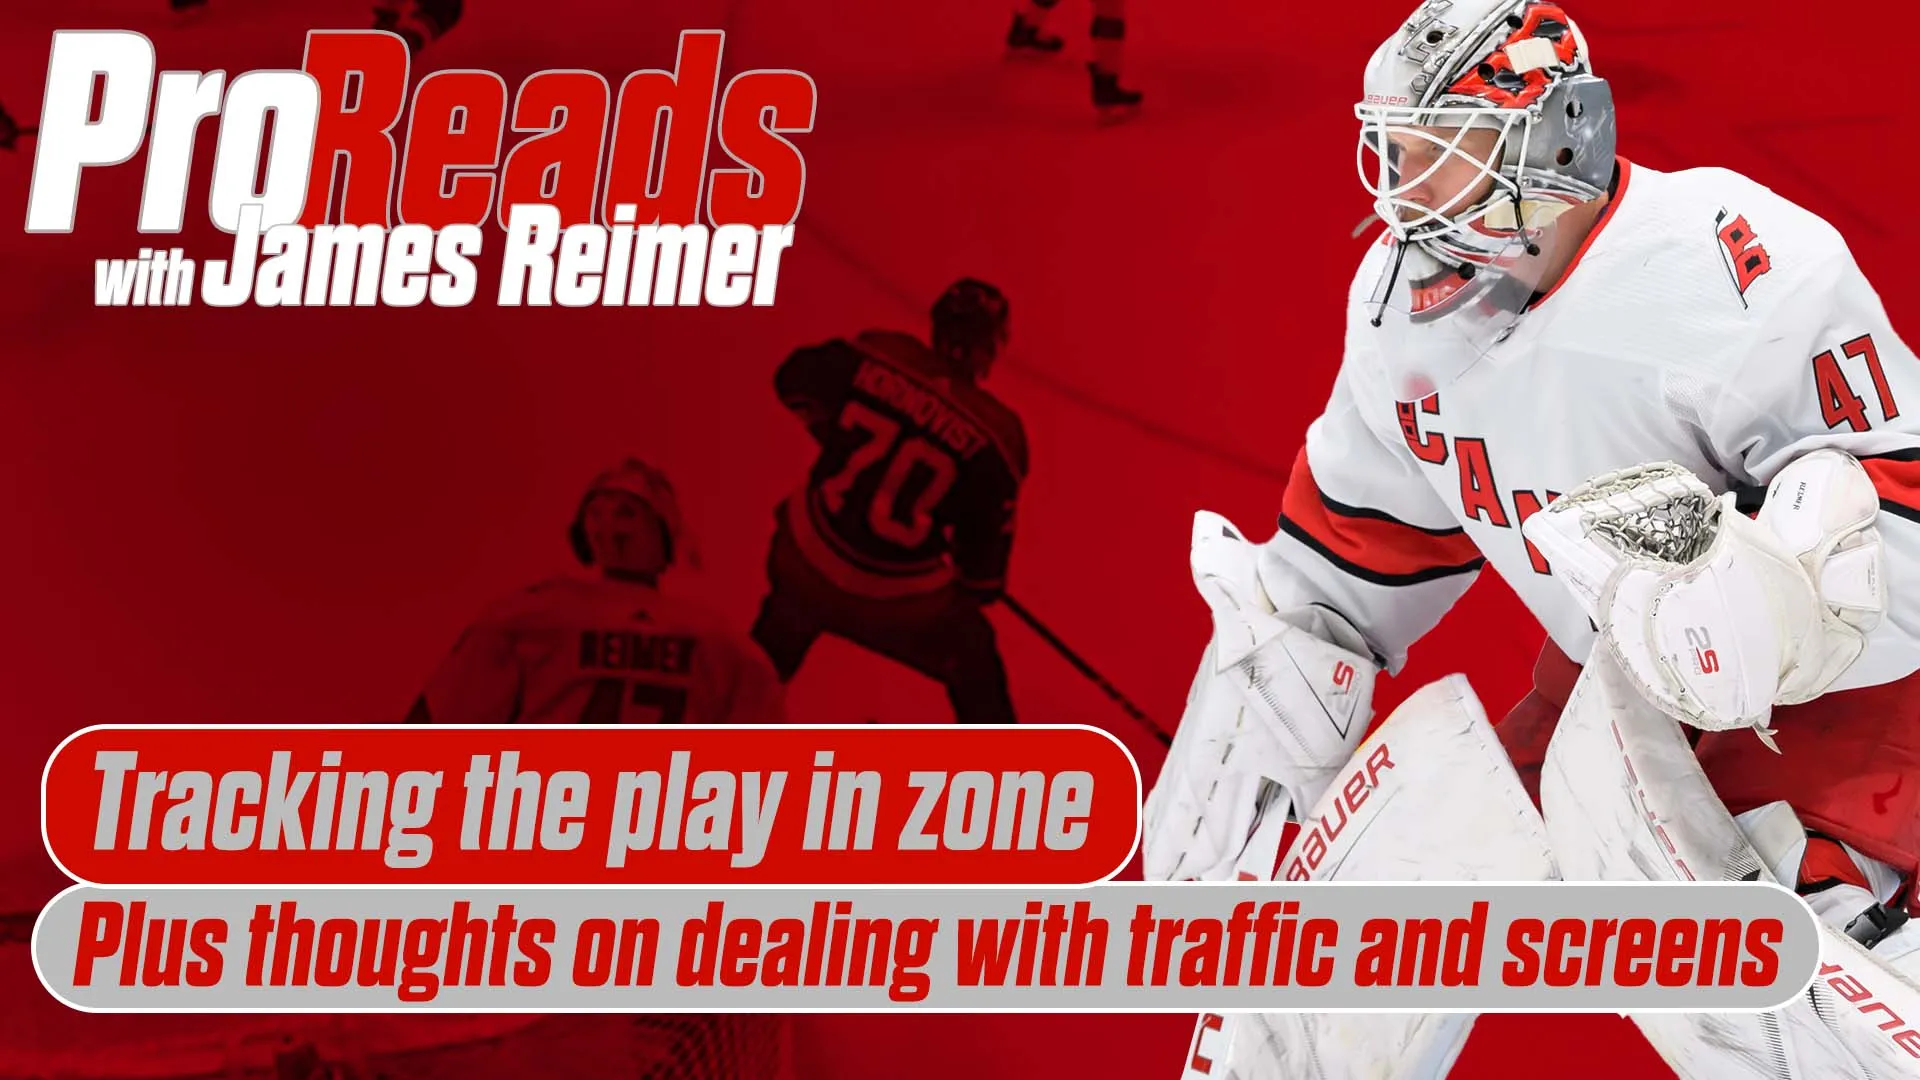 James Reimer on Traffic and Dealing with Screens